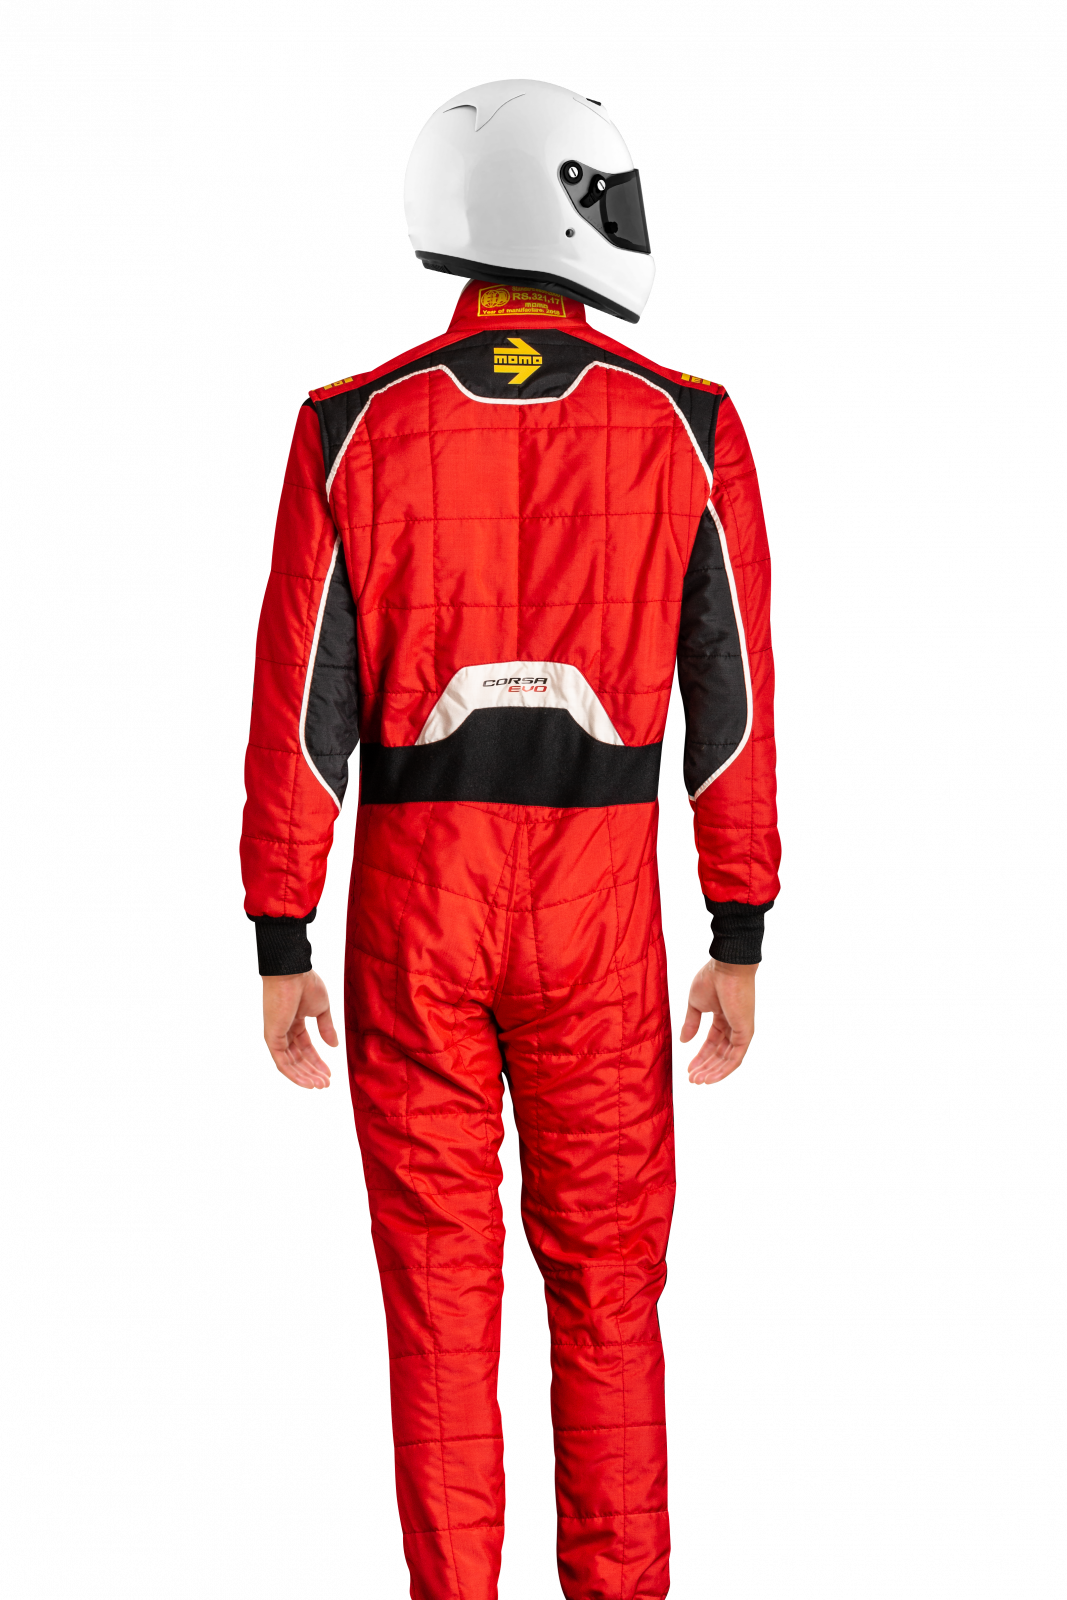 MOMO Corsa Evo Red Size 54 Racing Suit TUCOEVORED54